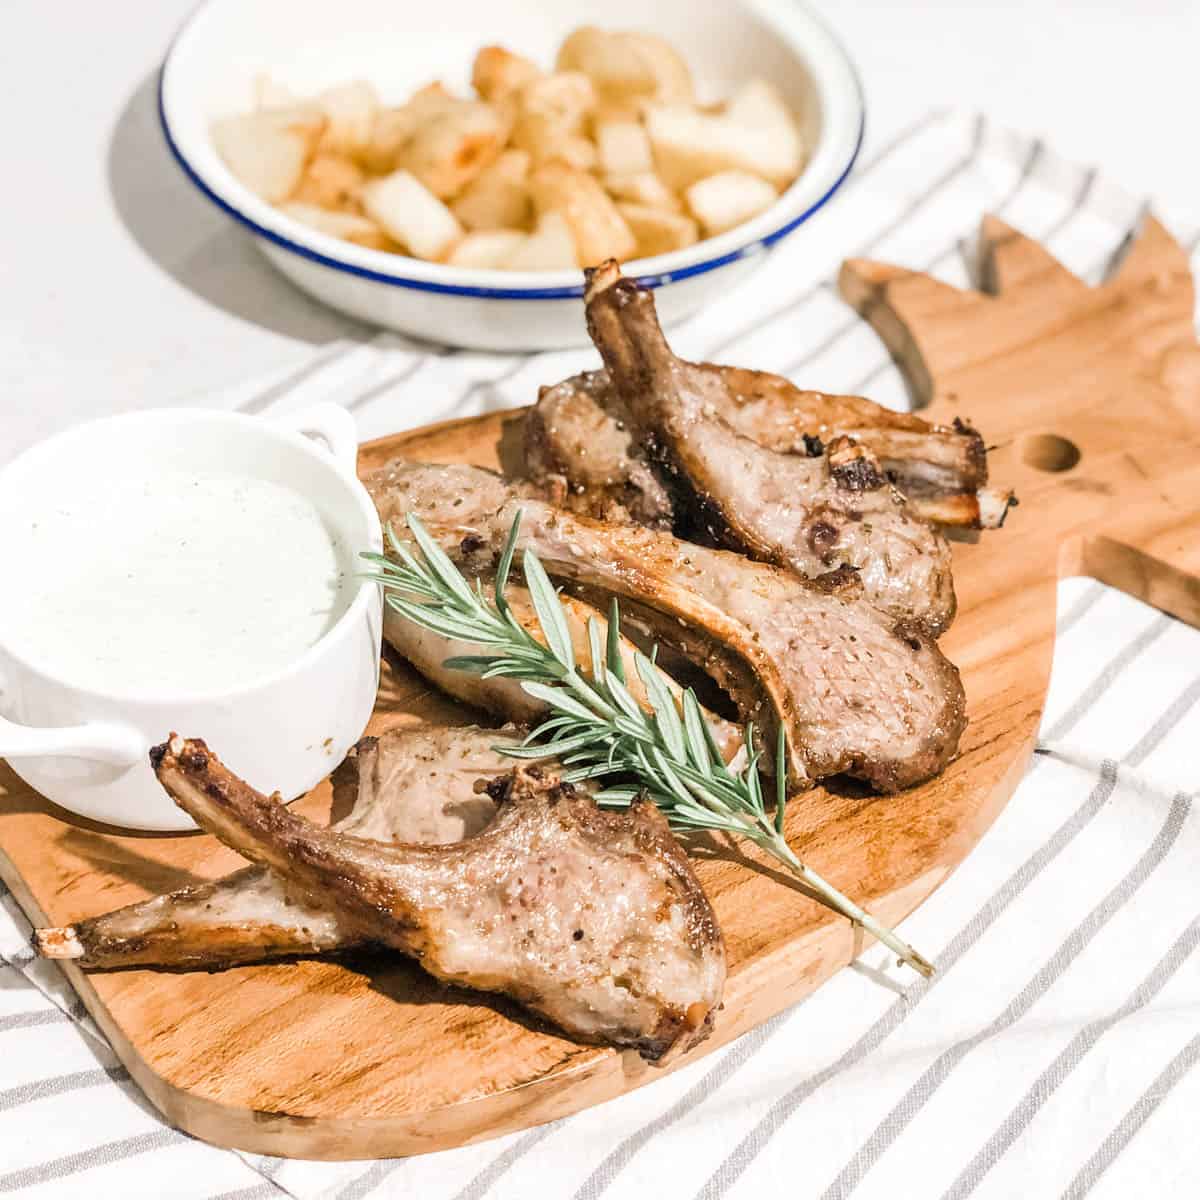 cooked lamb cutlets on a timber serving board with a grey and white striped teatoowl and a small white bowl of yogurt sauce and a bowl of roasted potato in the background